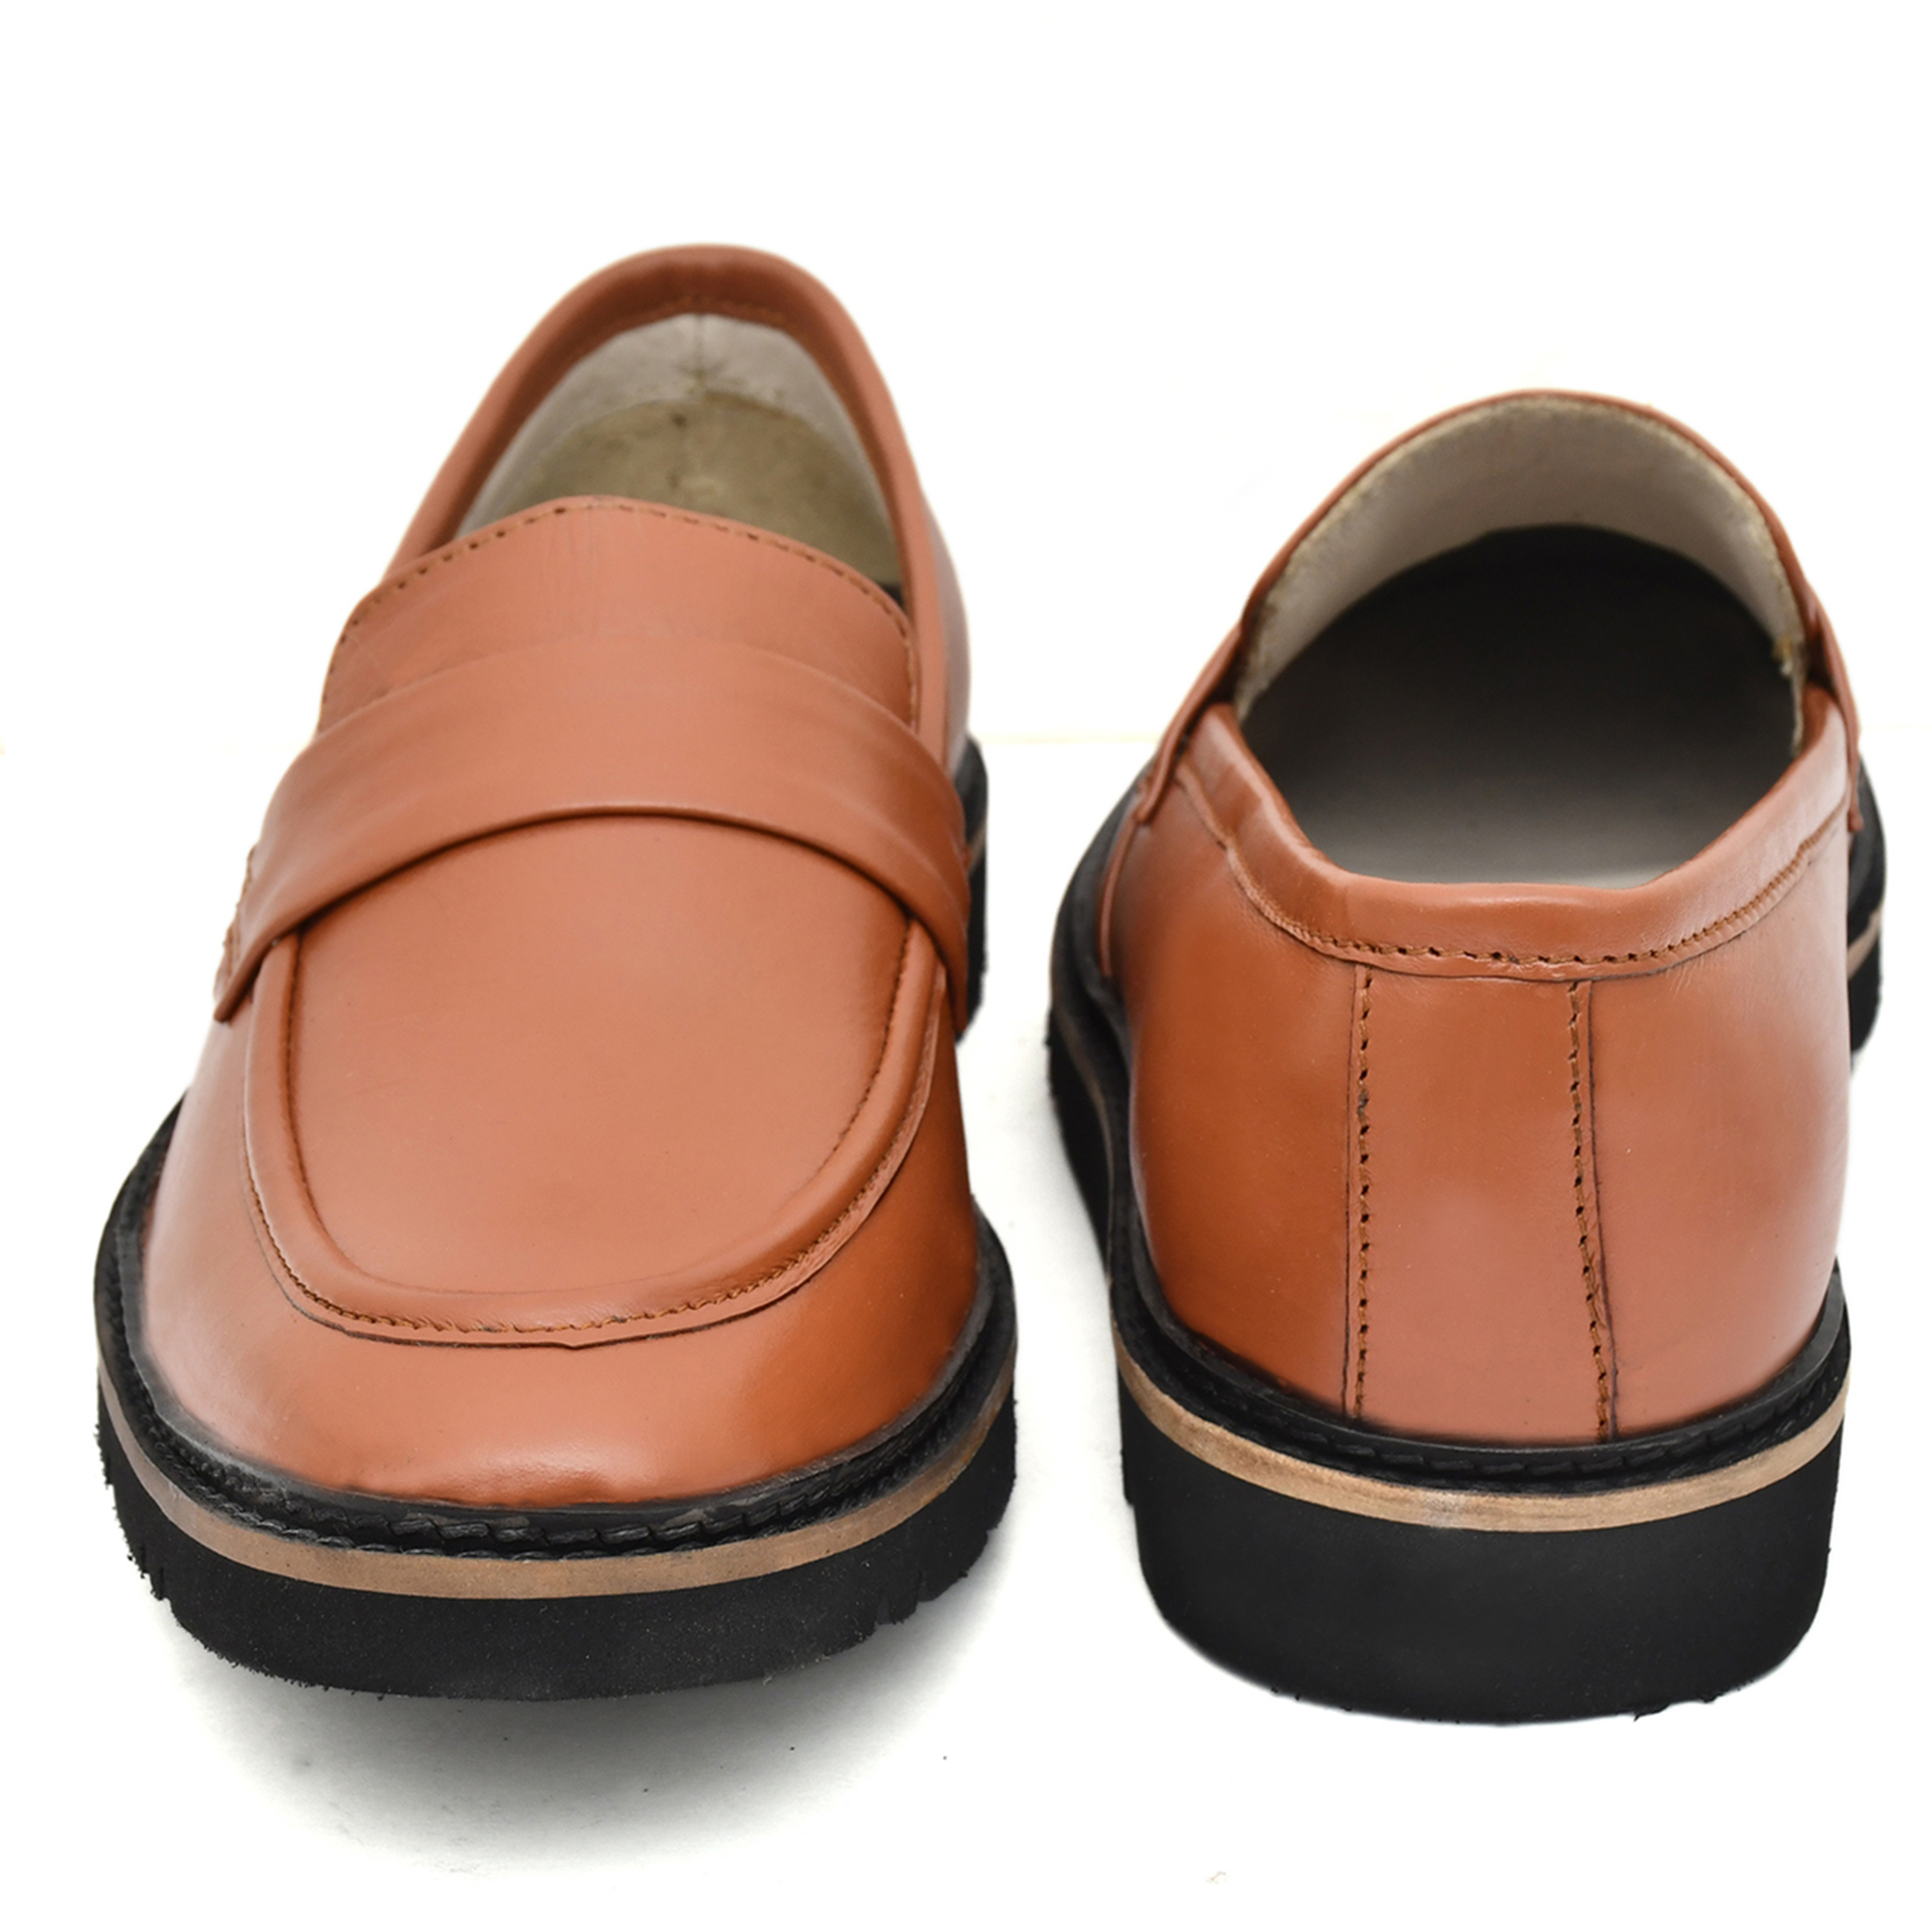 Pure Tan Leather Penny Loafers